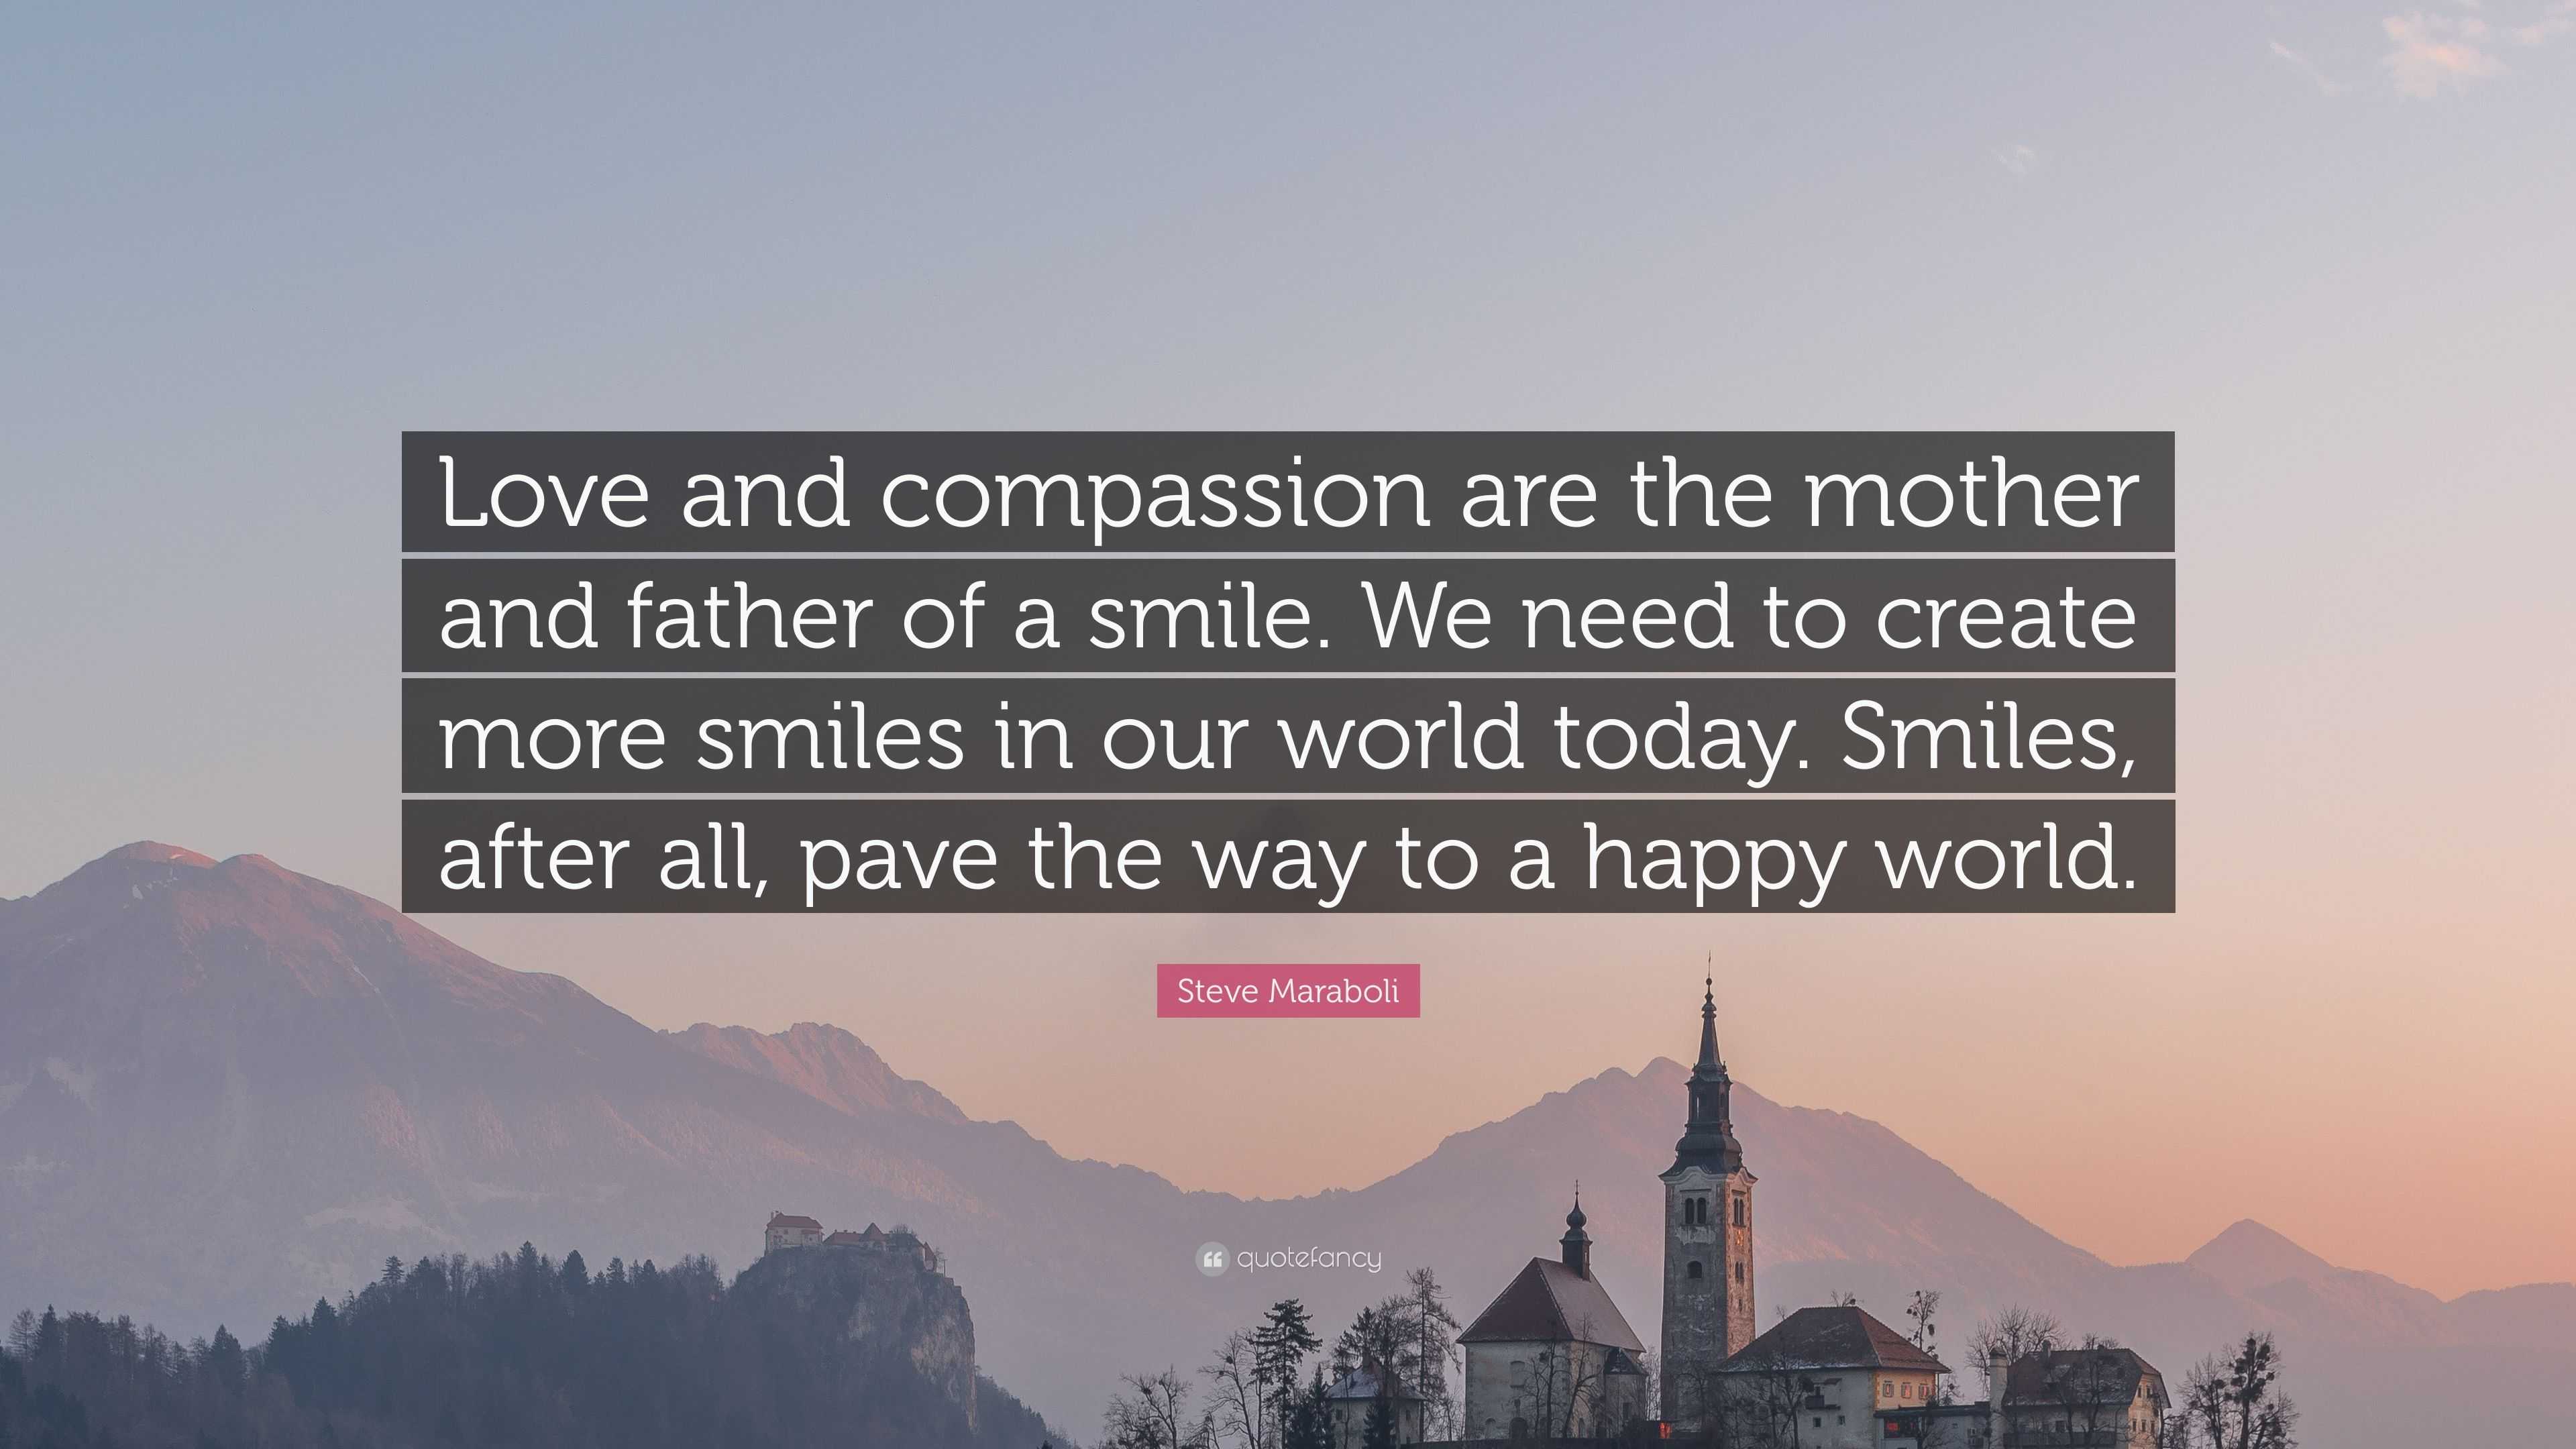 Steve Maraboli Quote “Love and passion are the mother and father of a smile